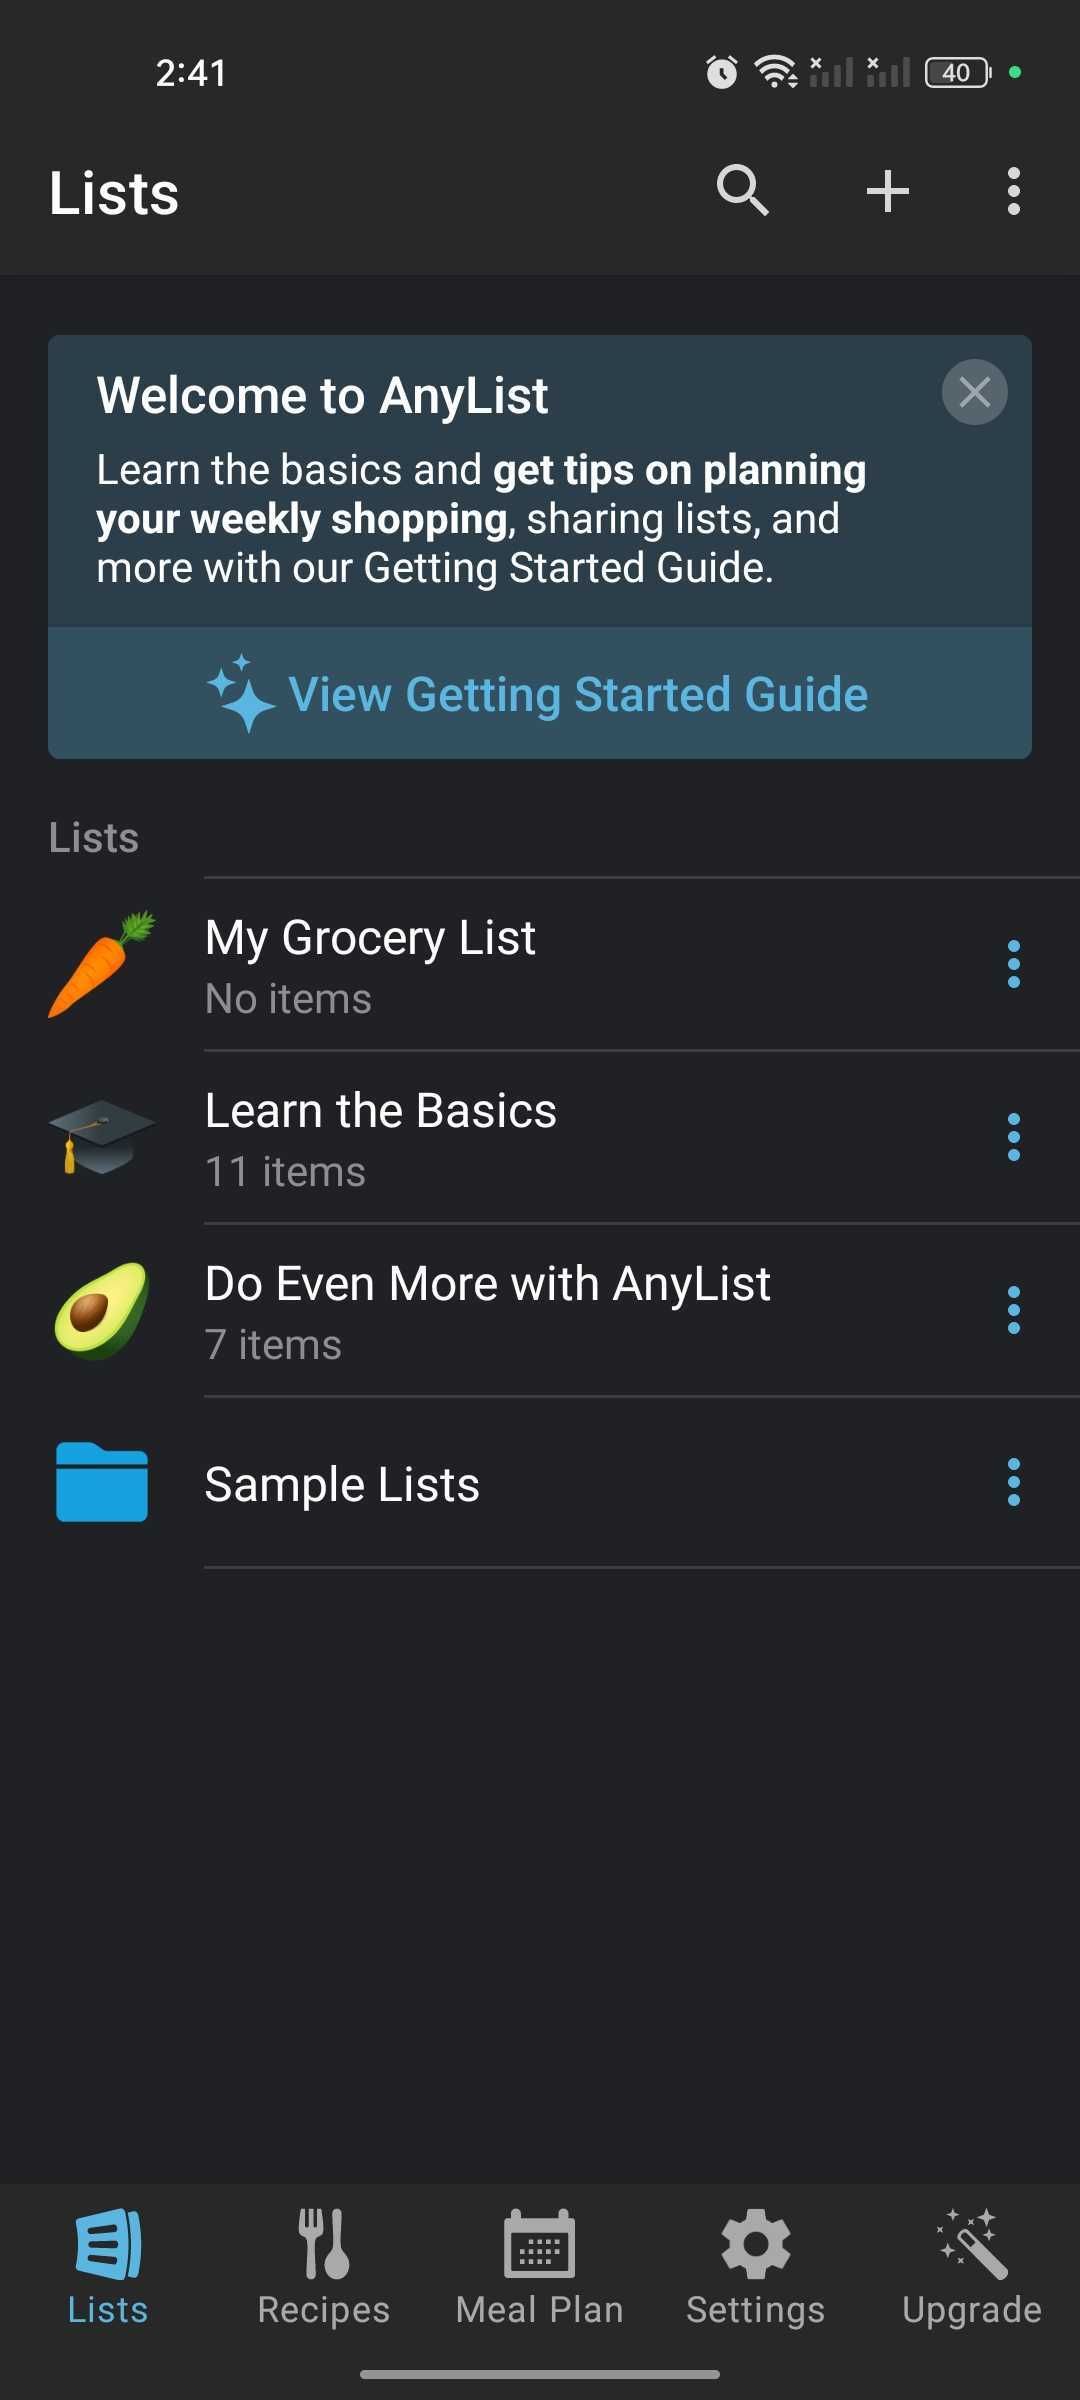 Lists section in the AnyList app